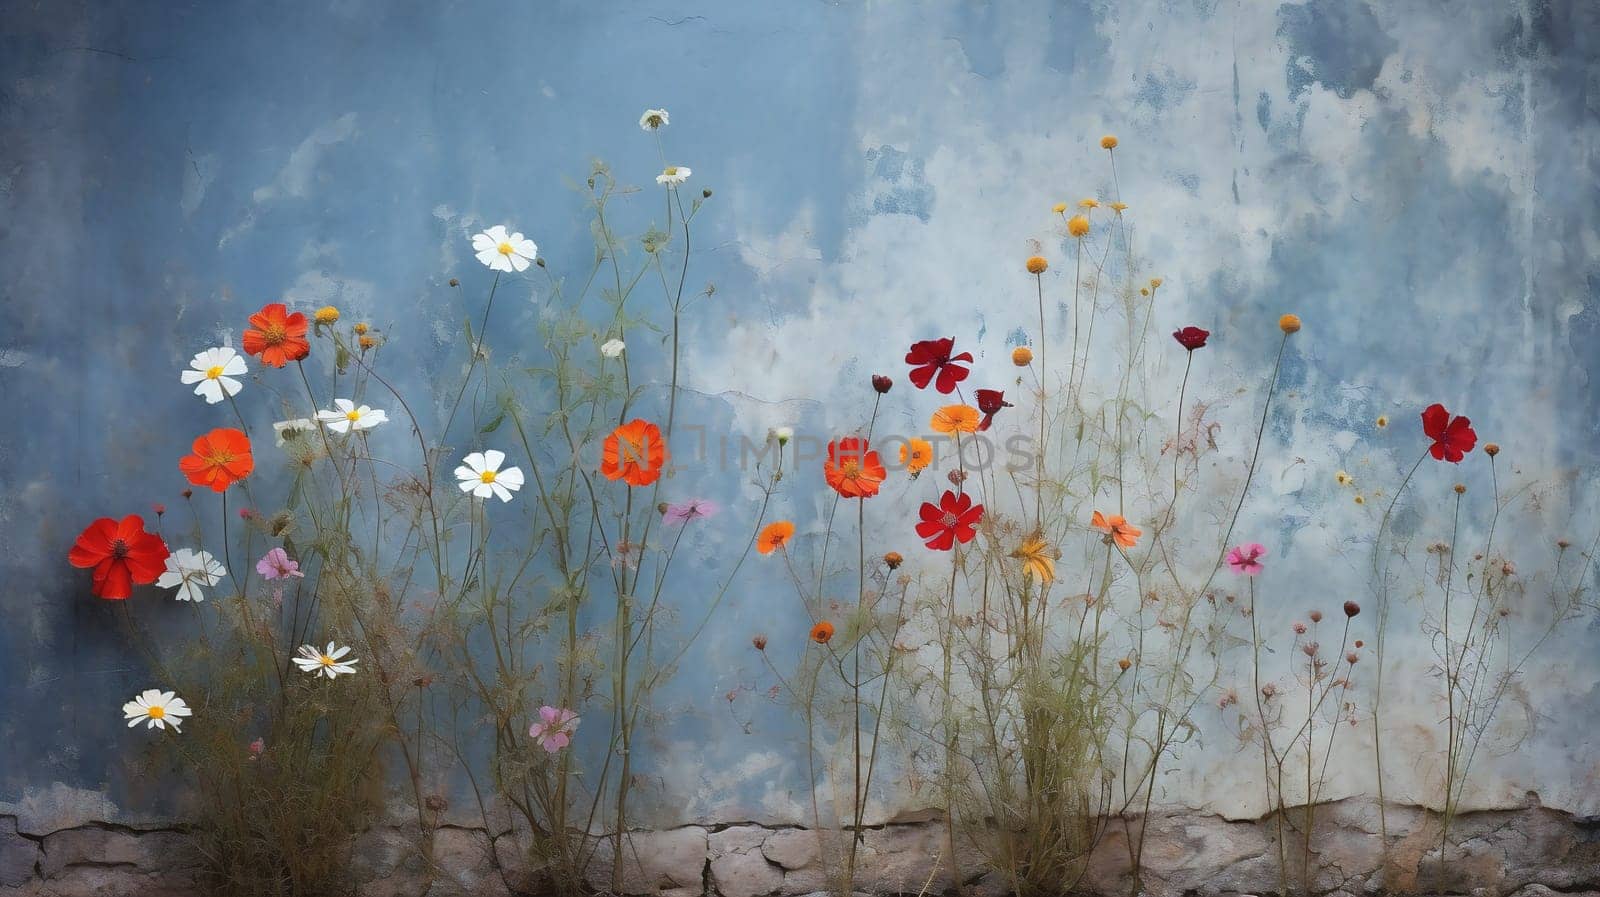 Colorful Wildflowers Blooming Against a Weathered Wall by chrisroll